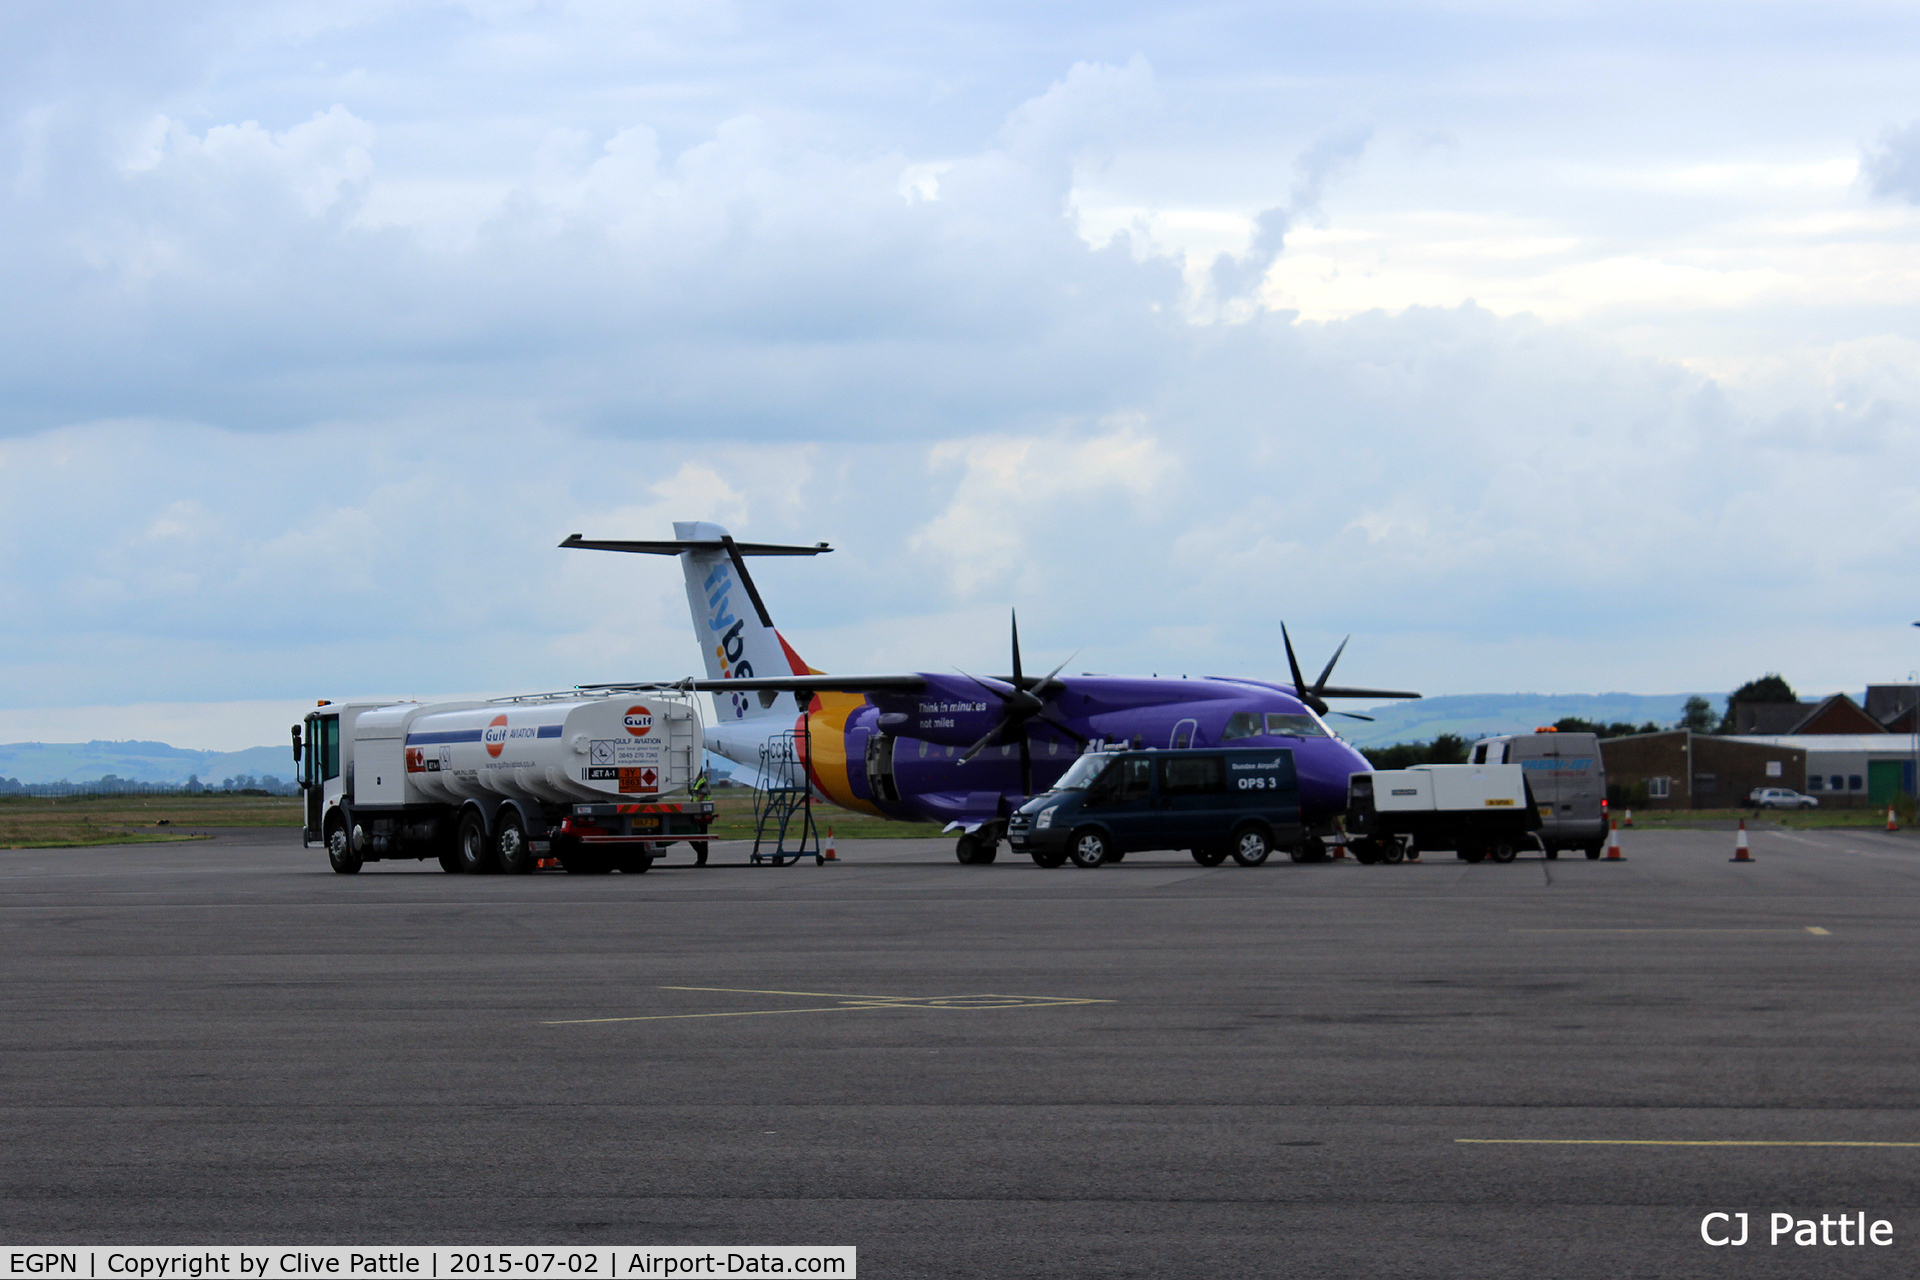 Dundee Airport, Dundee, Scotland United Kingdom (EGPN) - A Dornier of Flybe receiving fuel, food and luggage at Dundee Riverside Airport EGPN